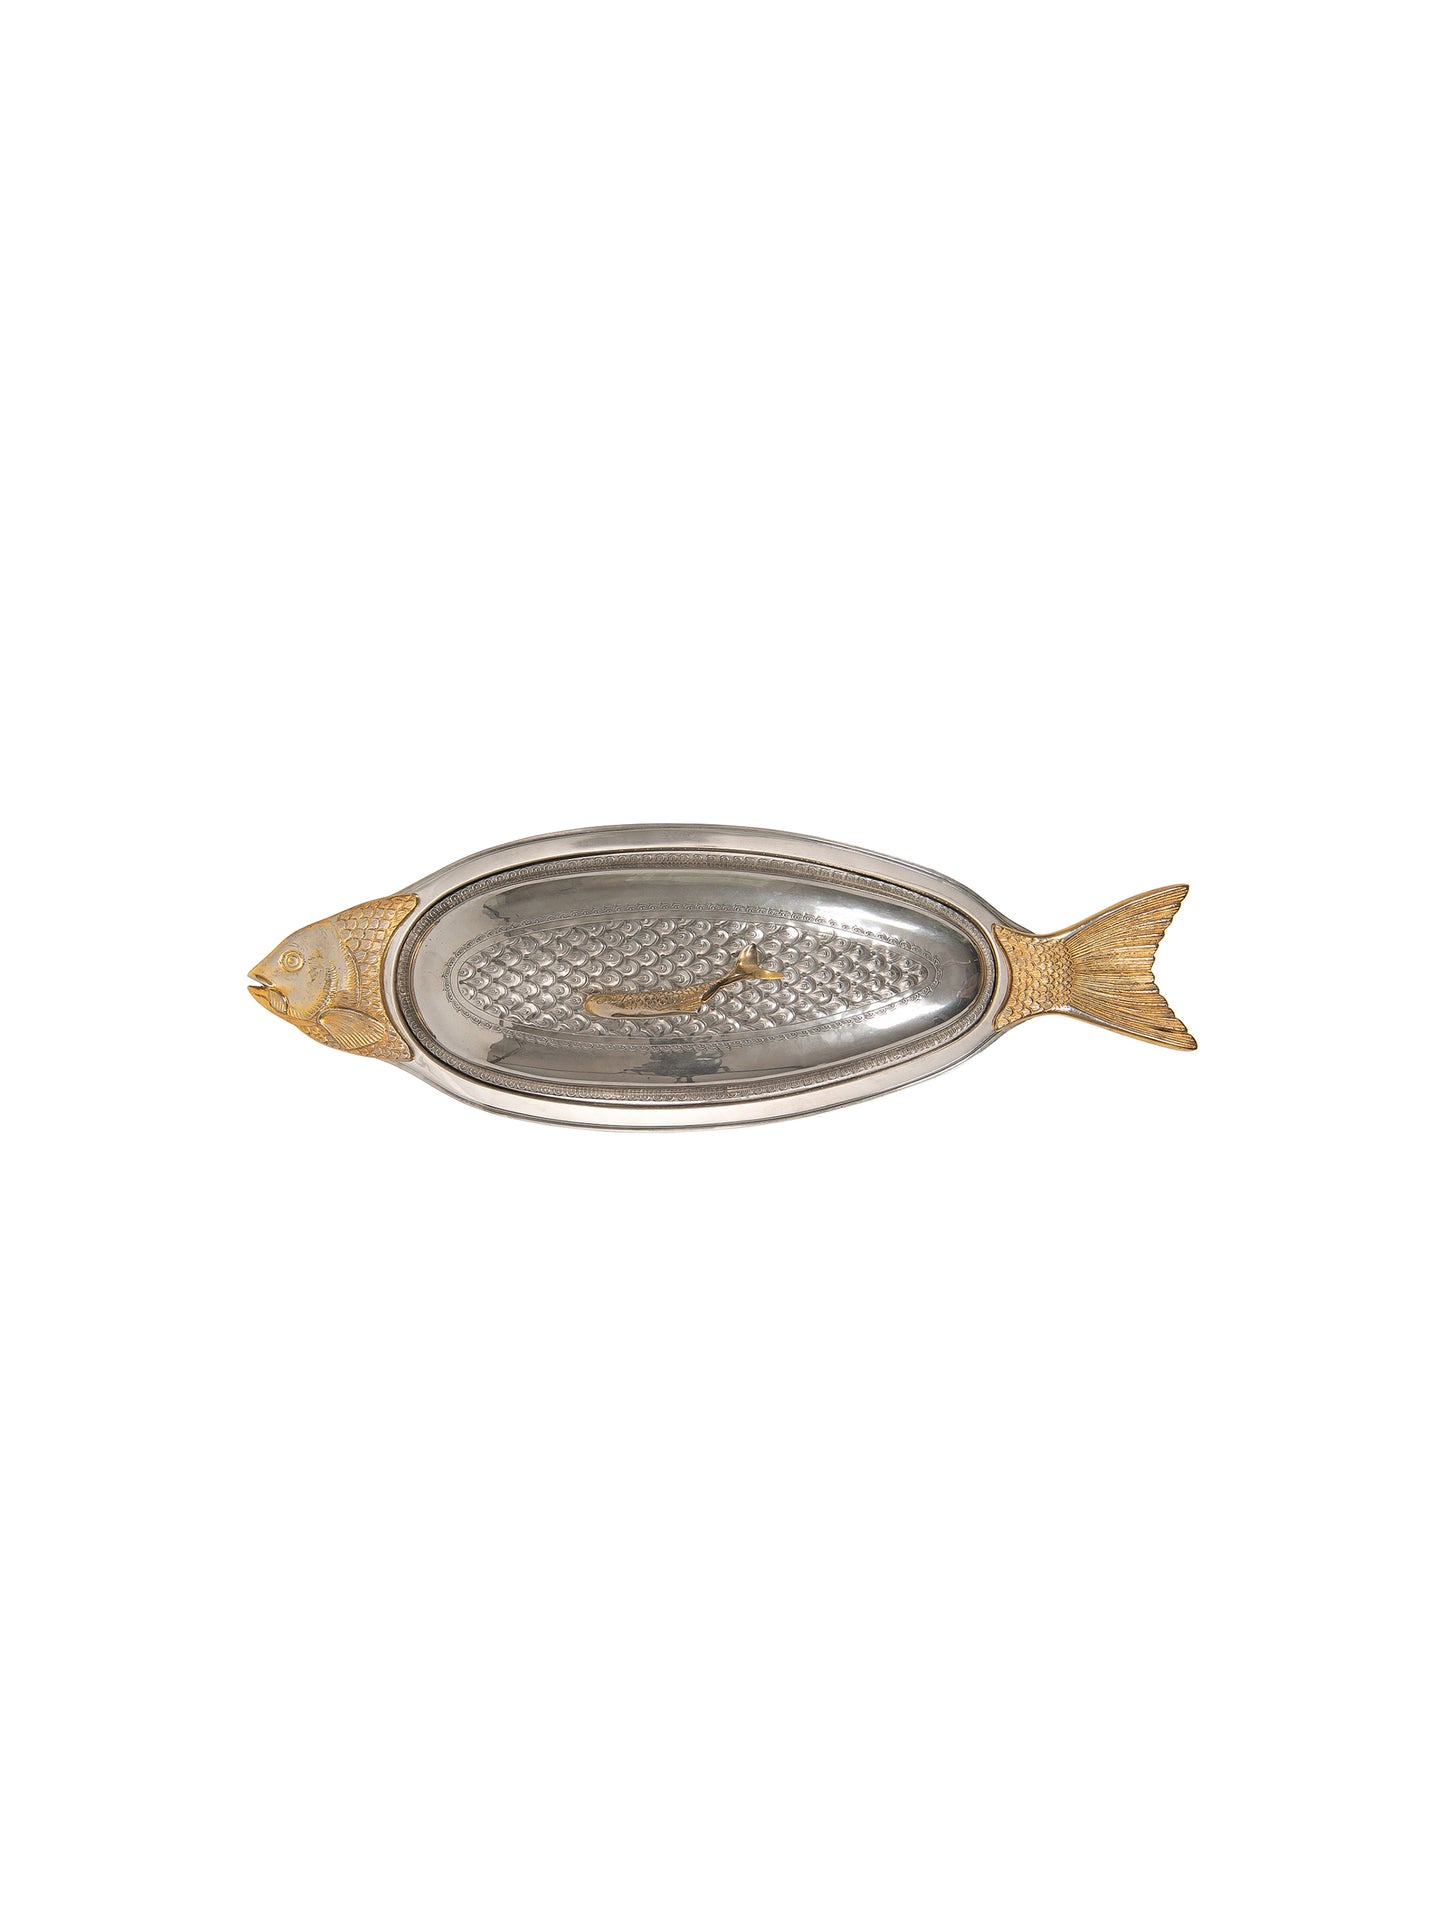 Vintage Fish Serving Platter with Lid Weston Table